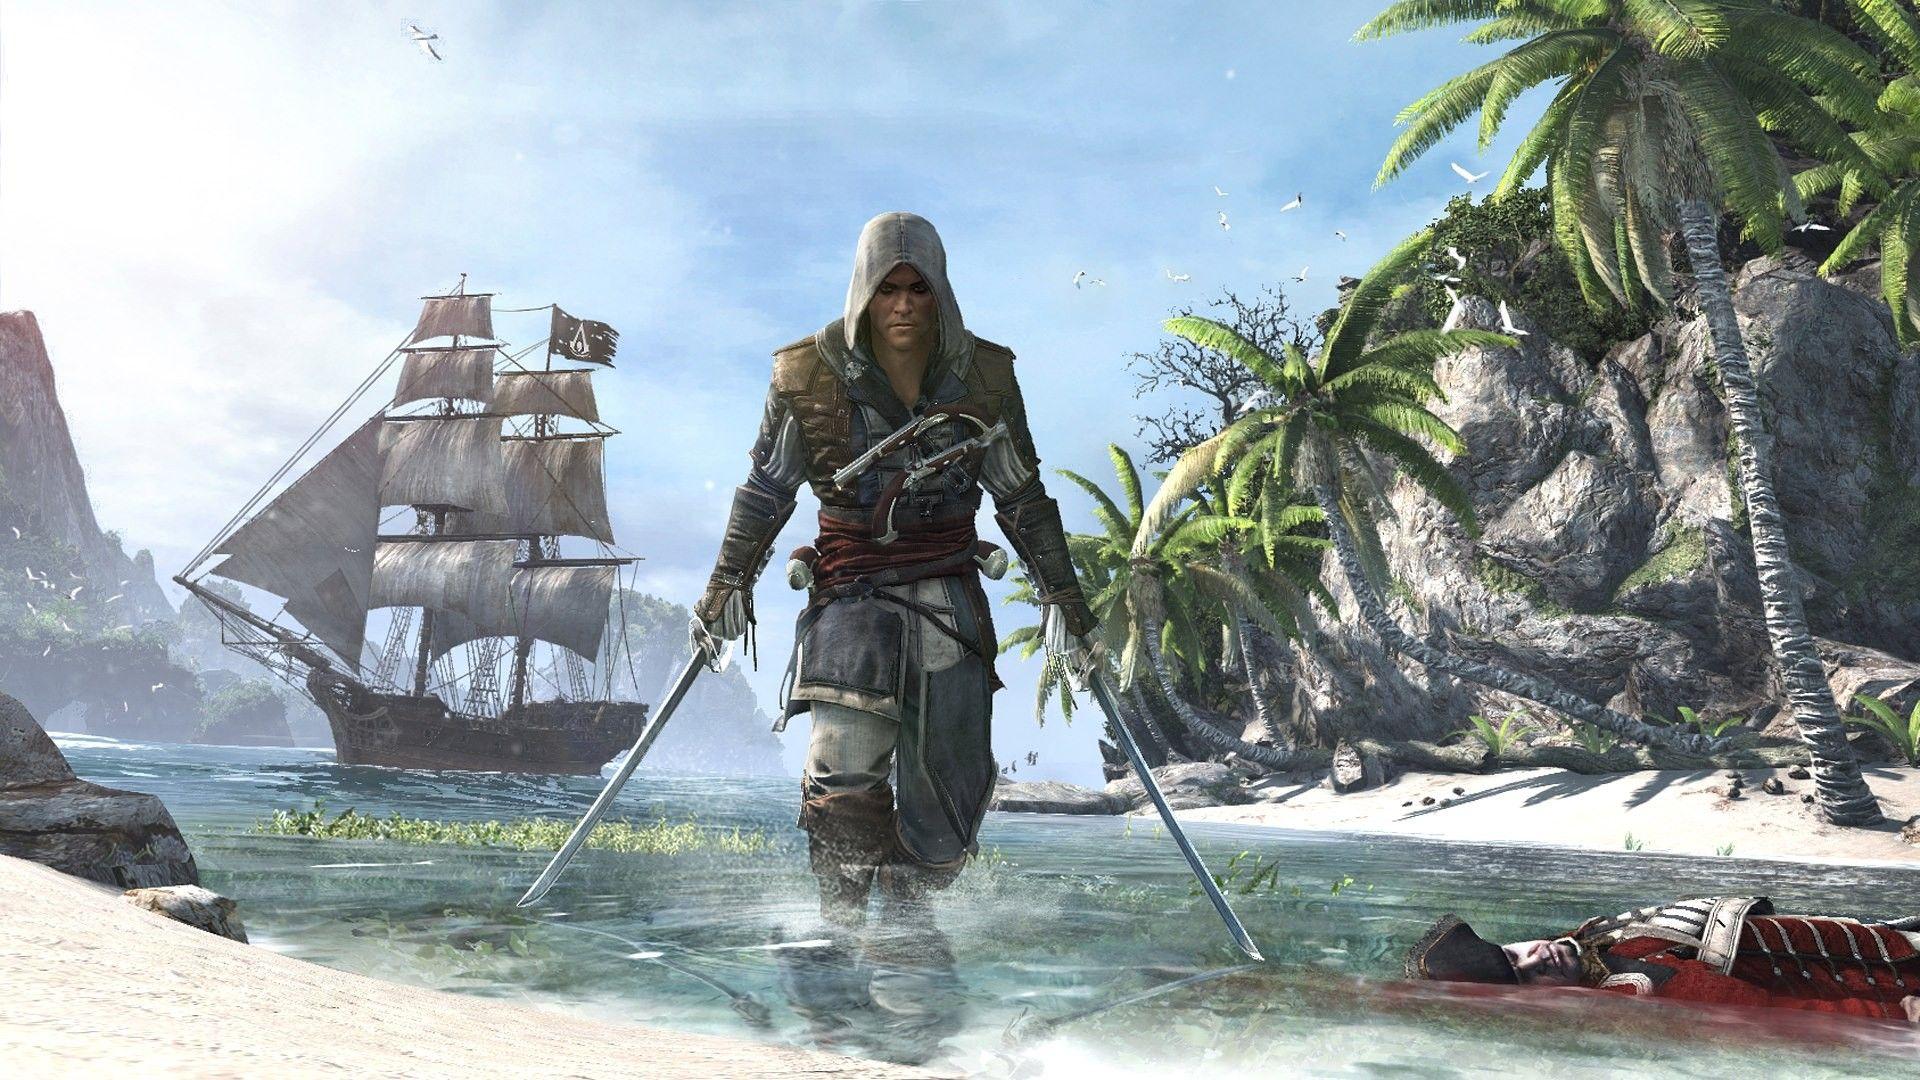 Assassin's Creed IV: Black Flag Full HD Wallpapers and Backgrounds